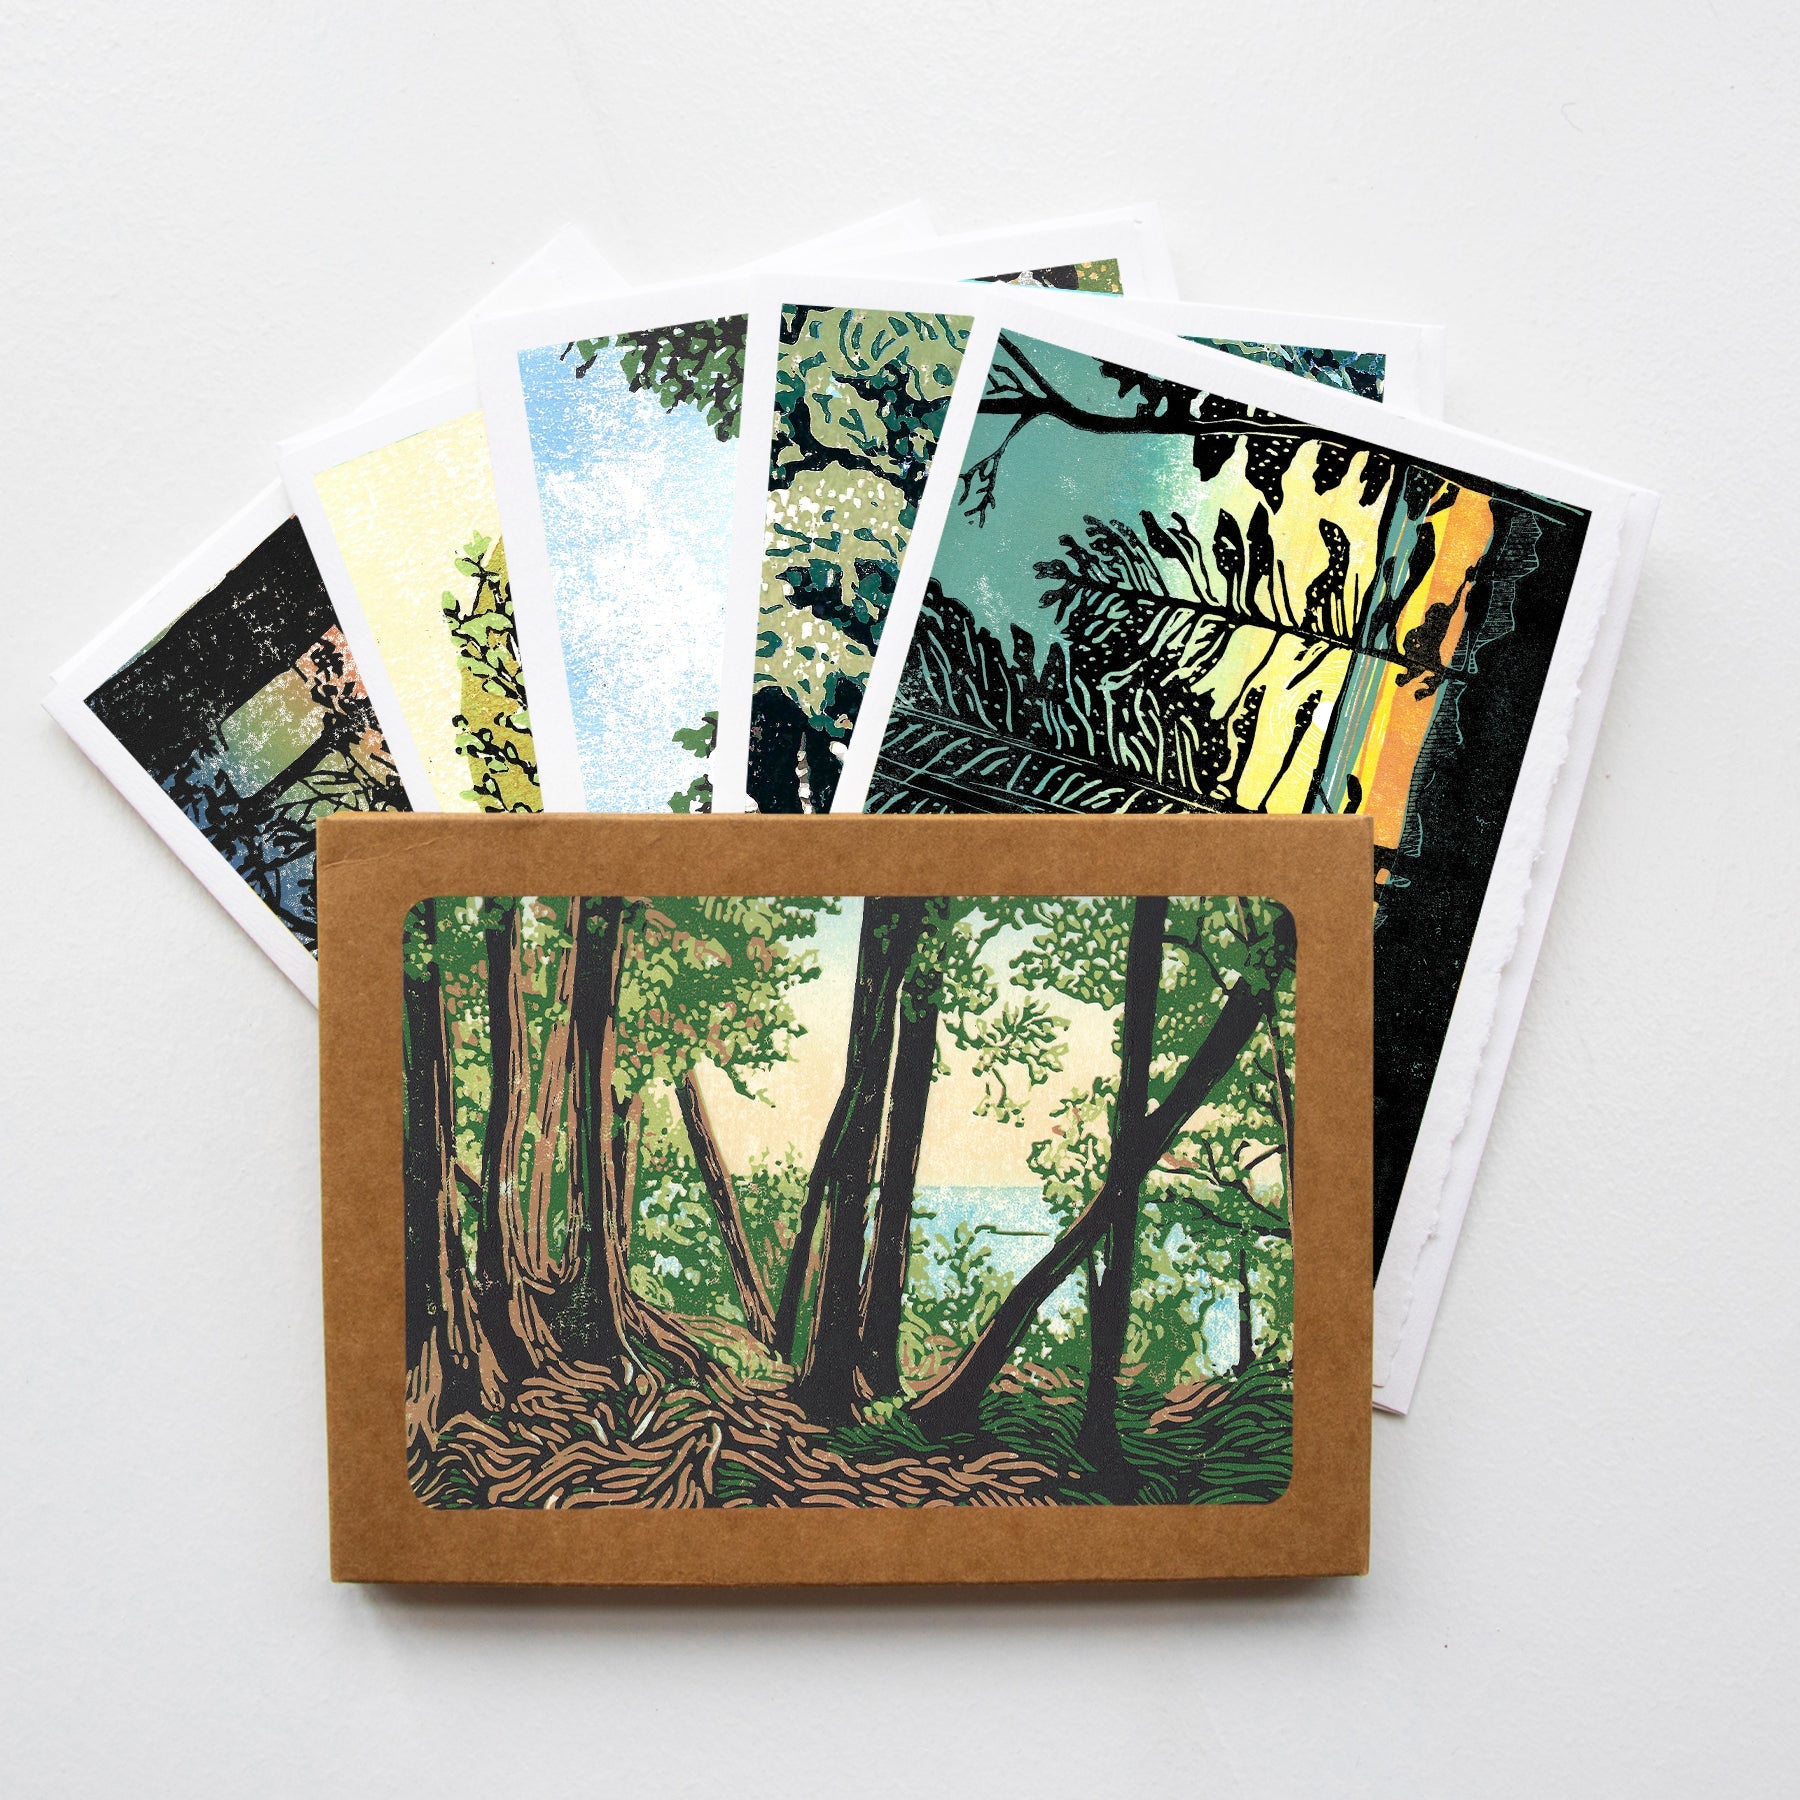 A casually elegant cards featuring Michigan landscapes art by Natalia Wohletz of Peninsula Prints.